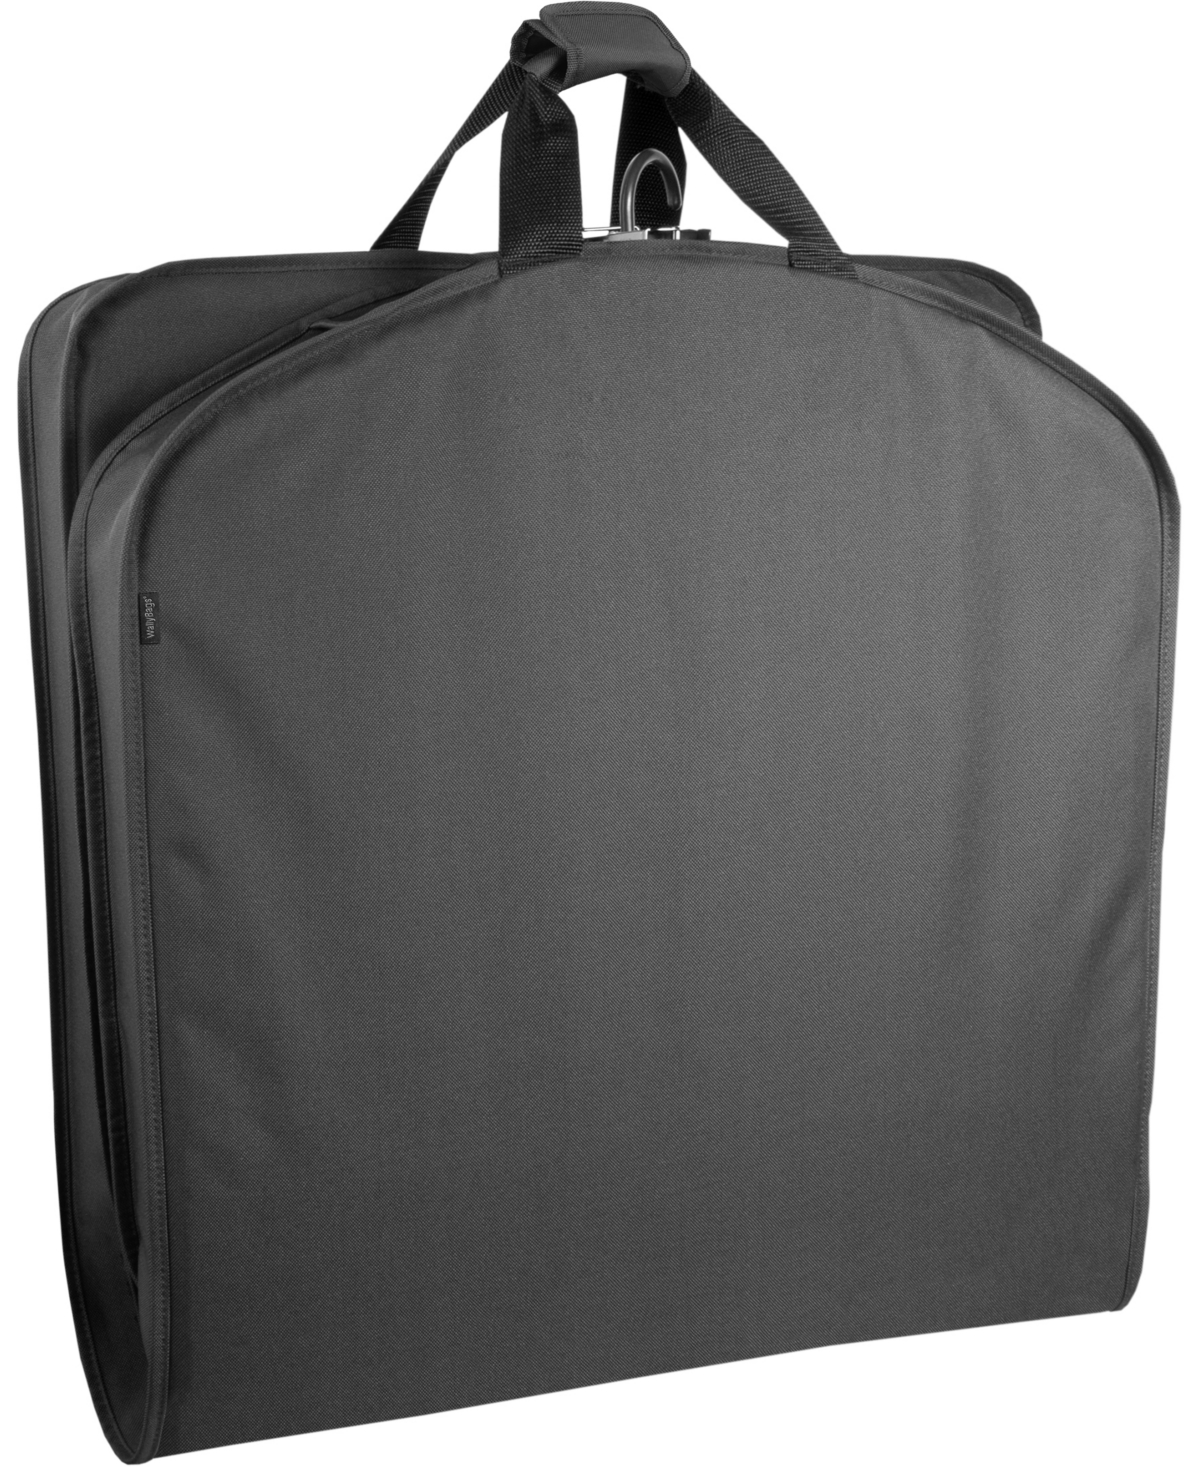 Shop Wallybags 60" Deluxe Travel Garment Bag In Black